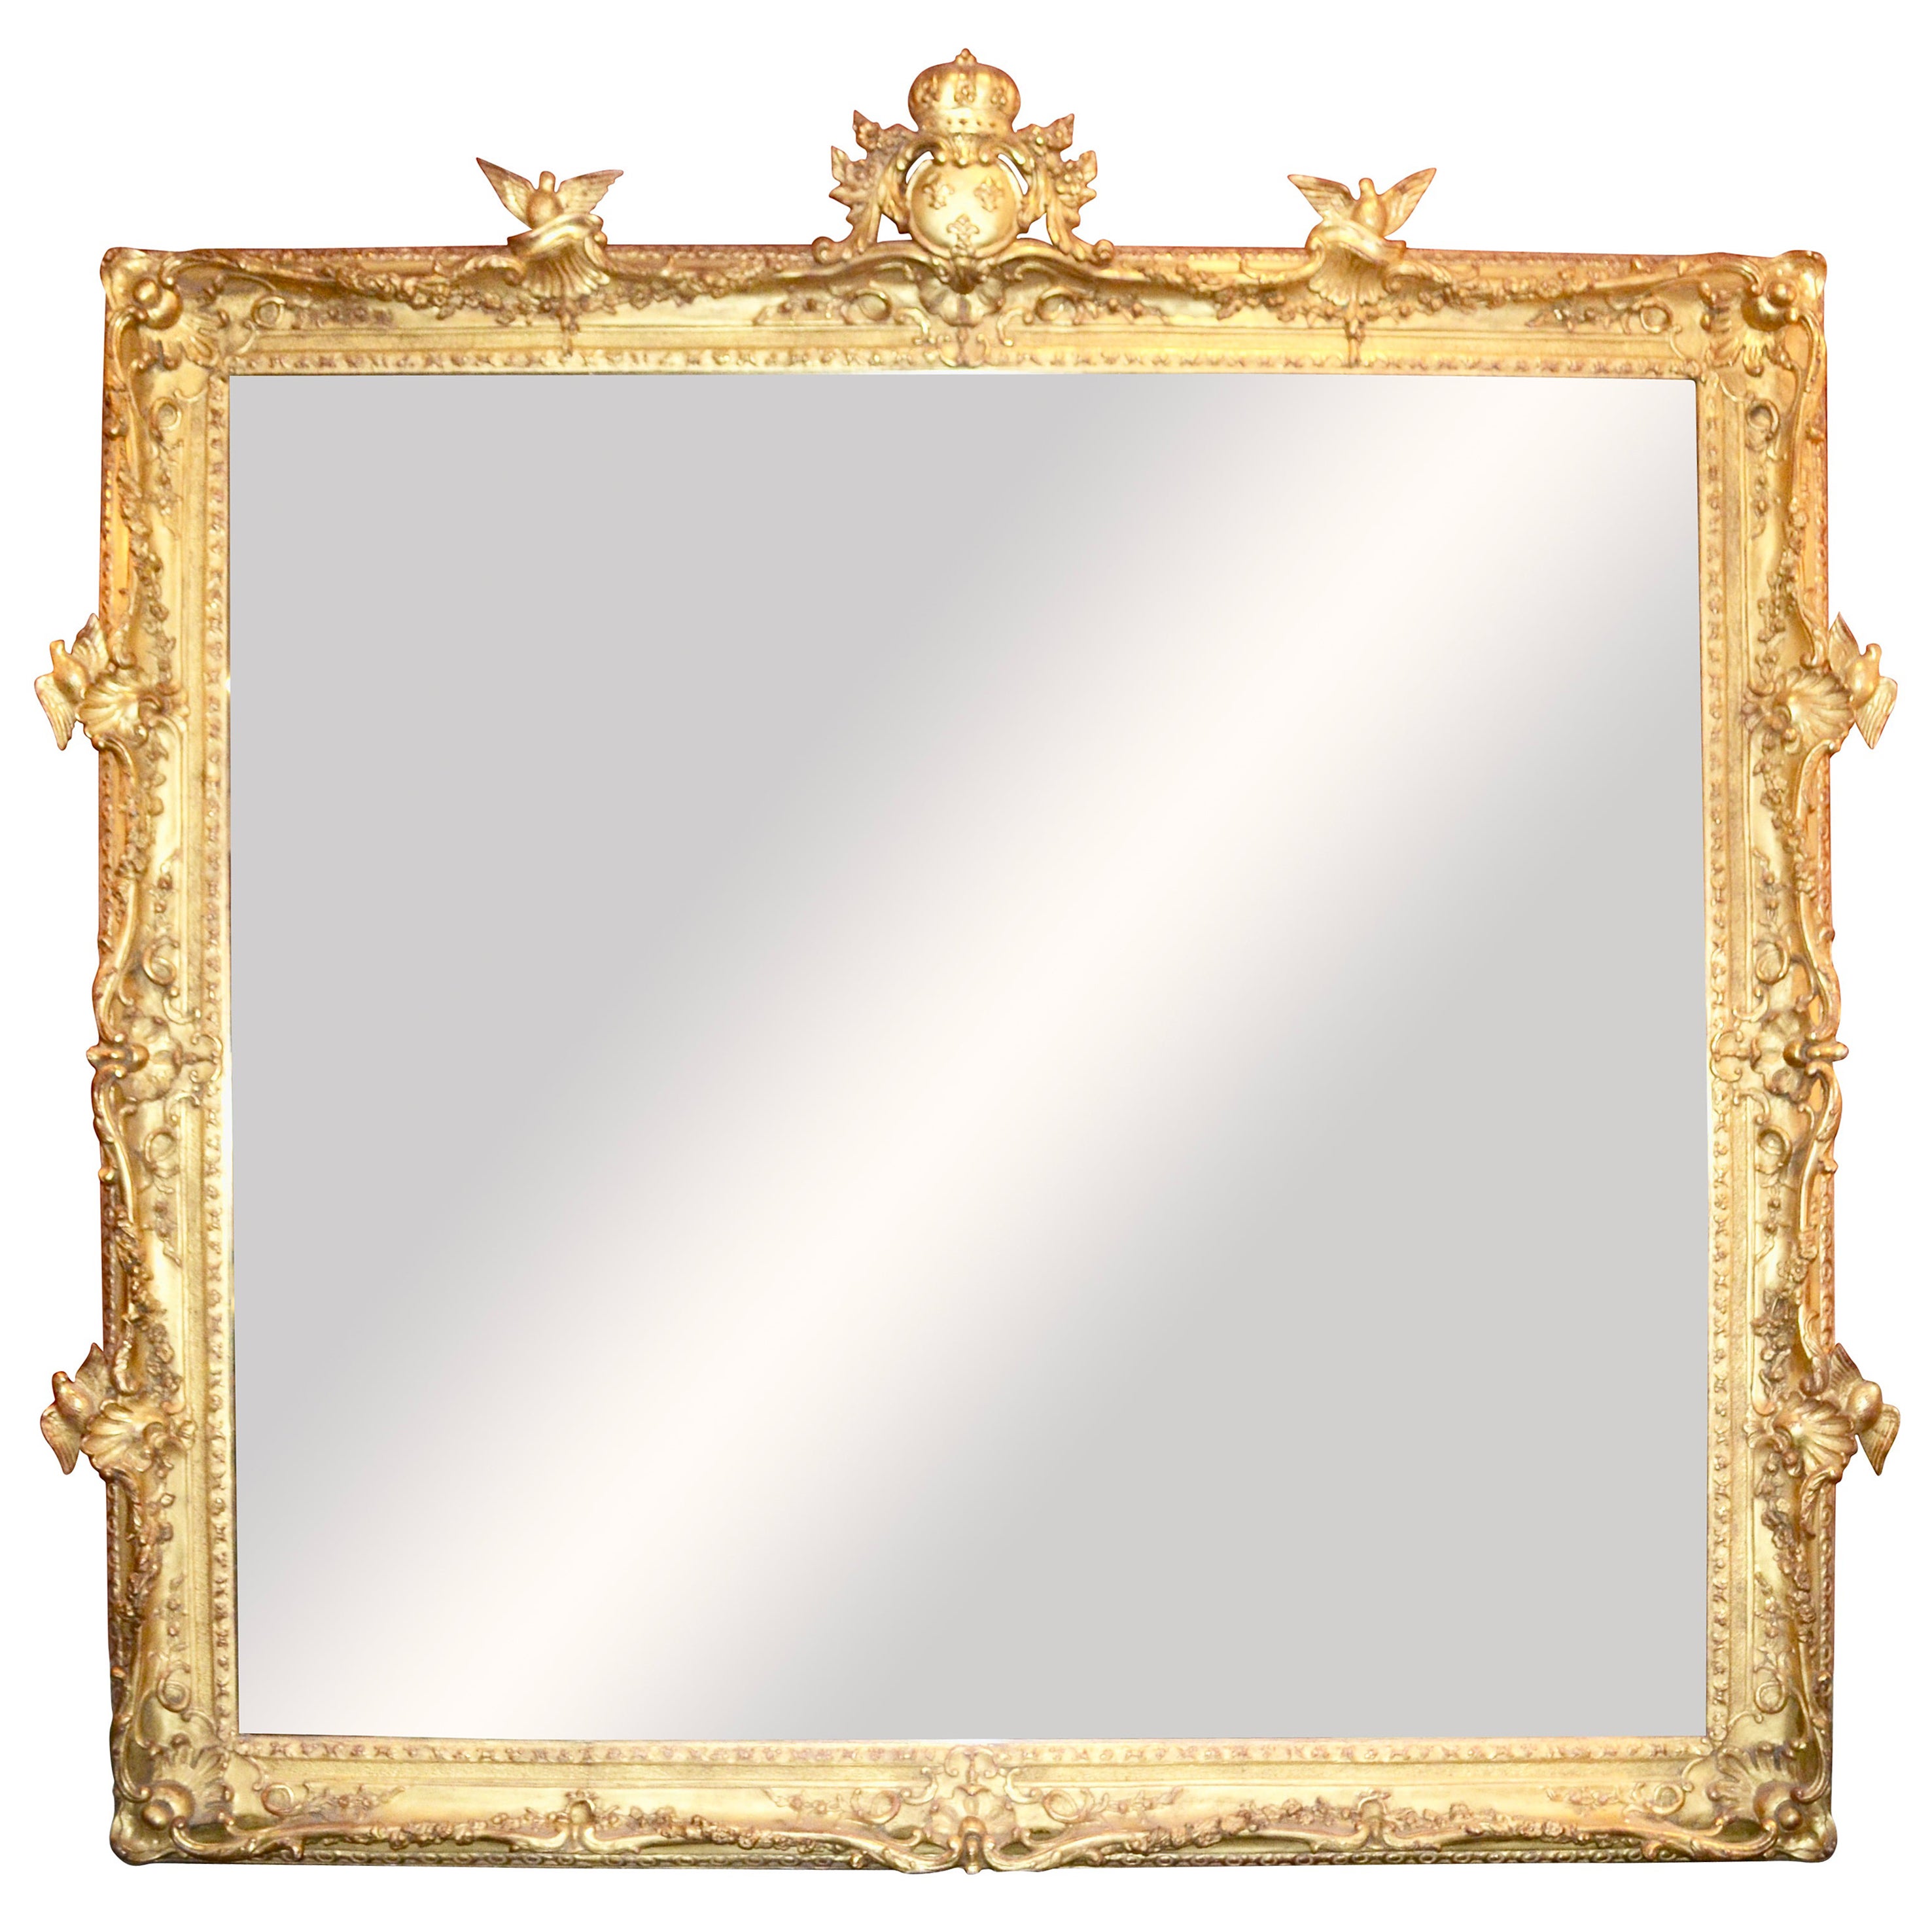 Palatial 19th Century French Louis XV Style Carved Giltwood Mirror For Sale